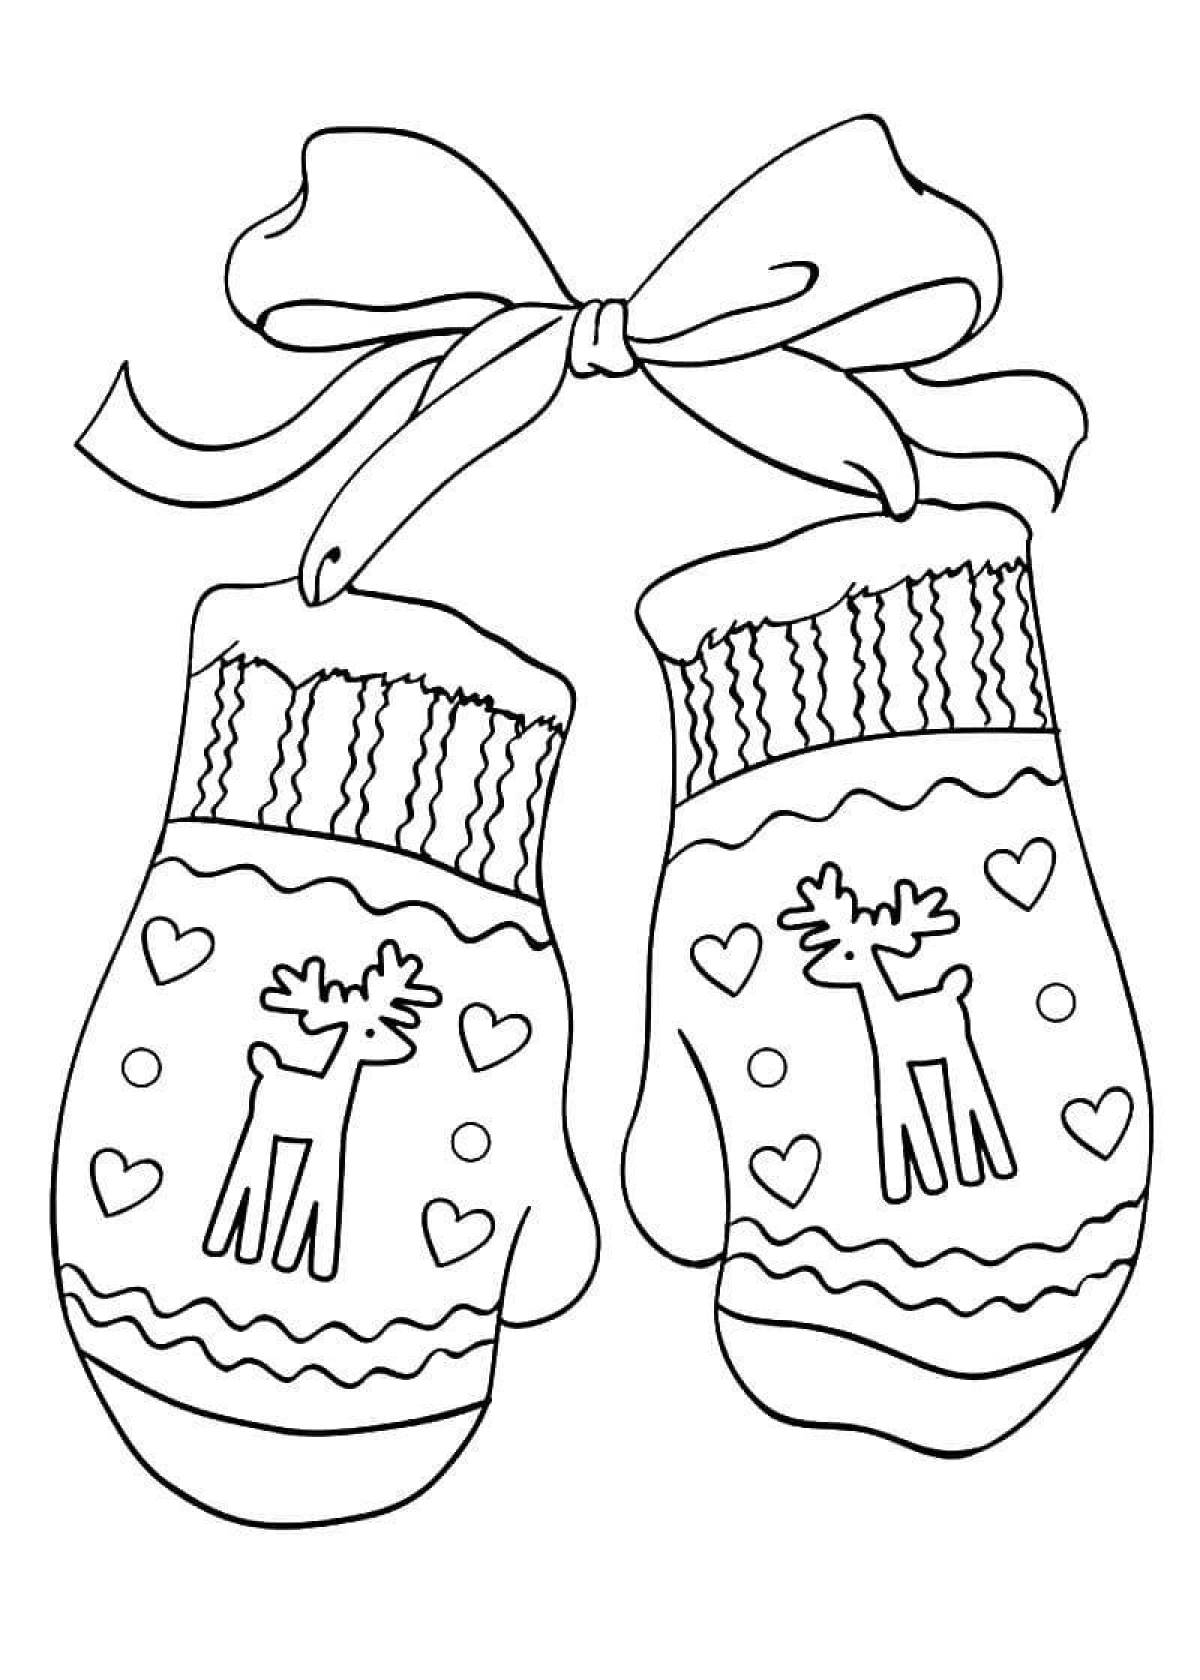 Great coloring mitten for babies